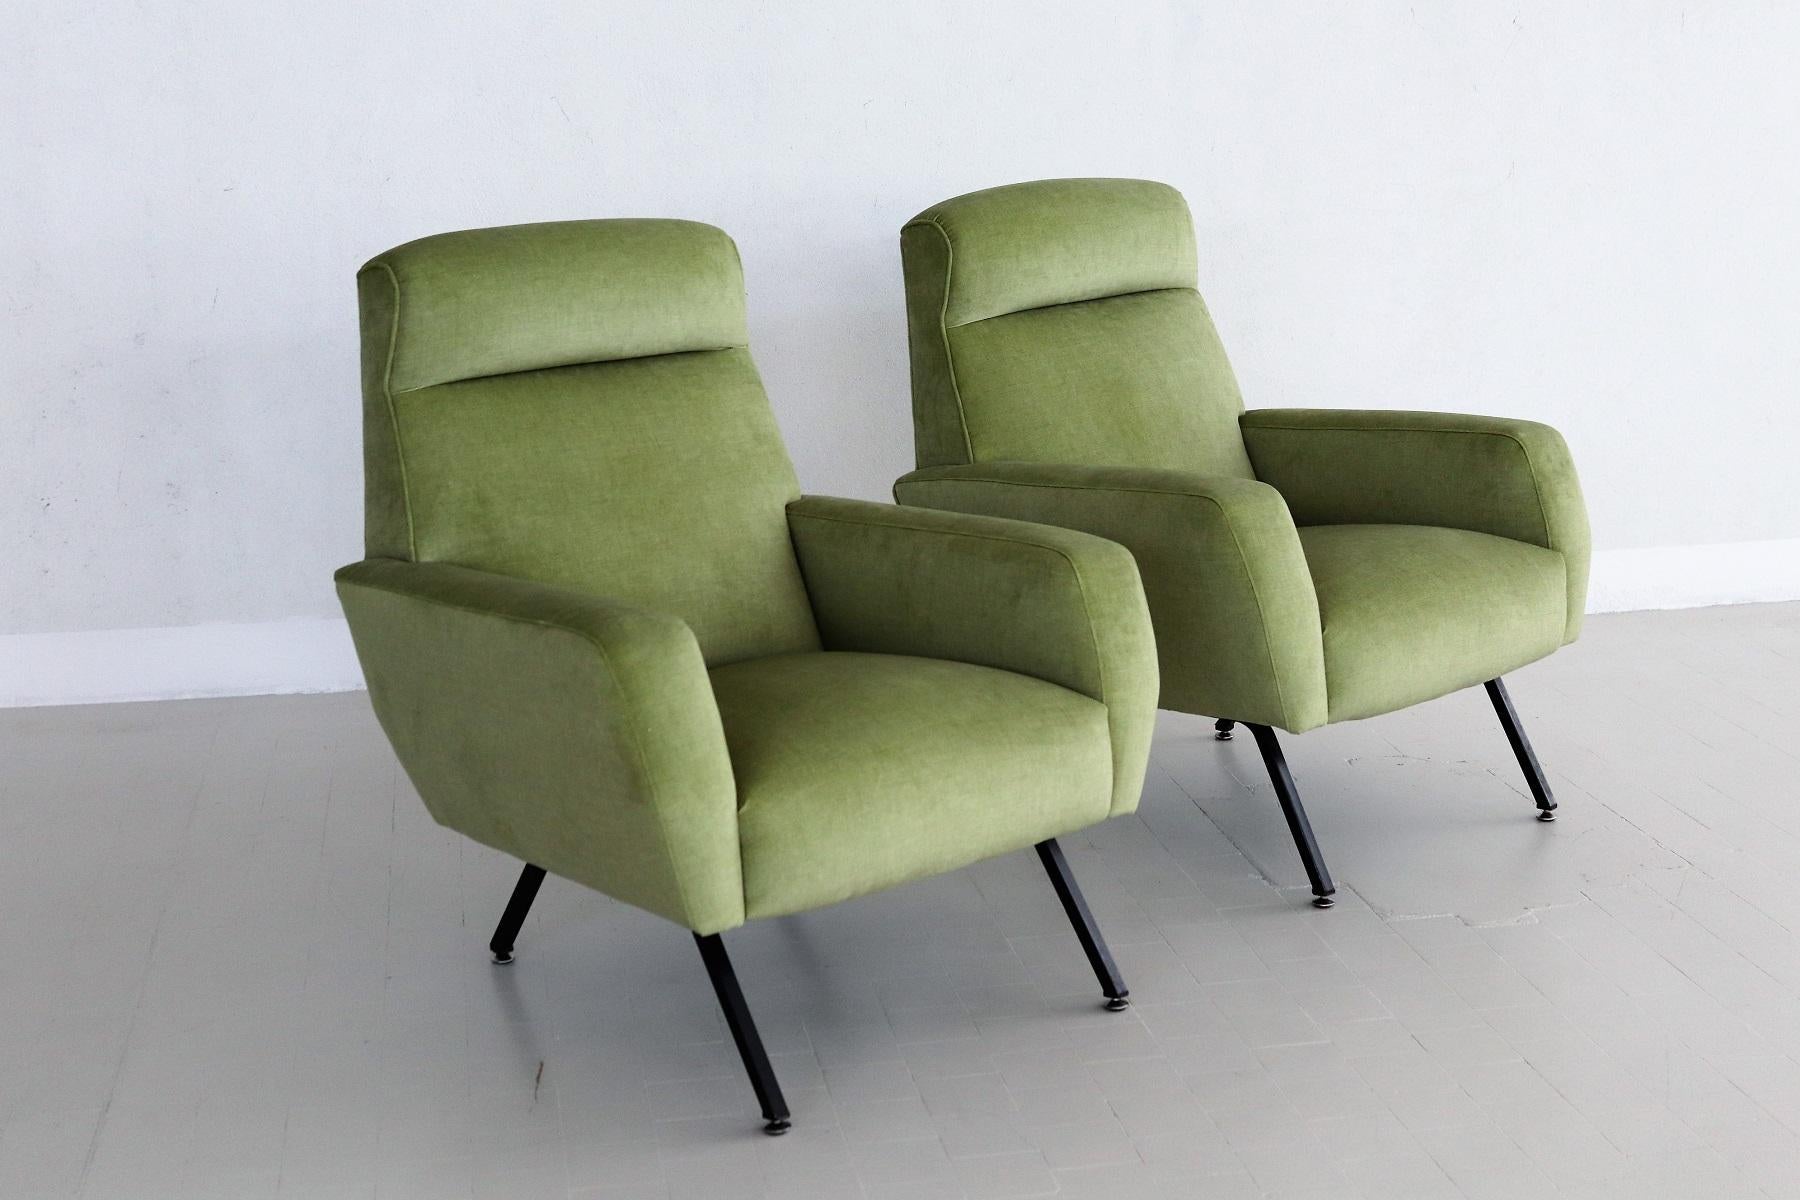 A set of two beautiful and very comfortable Italian Midcentury armchairs or lounge chairs from the 1960s.
The have been professionally and completely re-upholstered with new foam, straps and easy-care green velvet of great quality.
The lounge